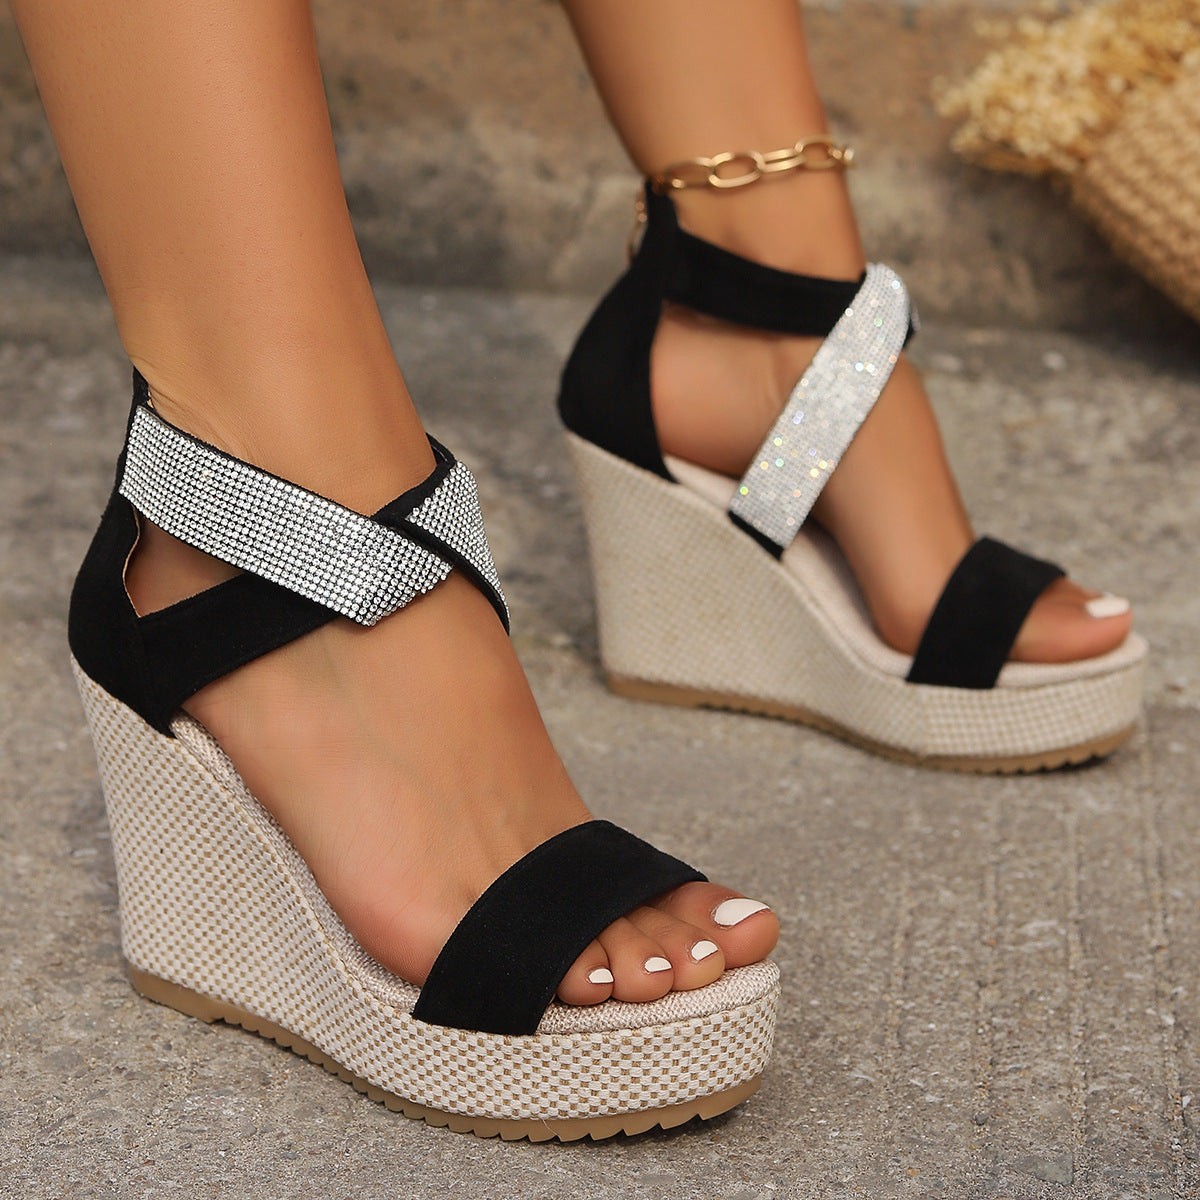 Fish Mouth High Wedges Sandals With Rhinestone Design Fashion Summer Platform Shoes For Women apparel & accessories